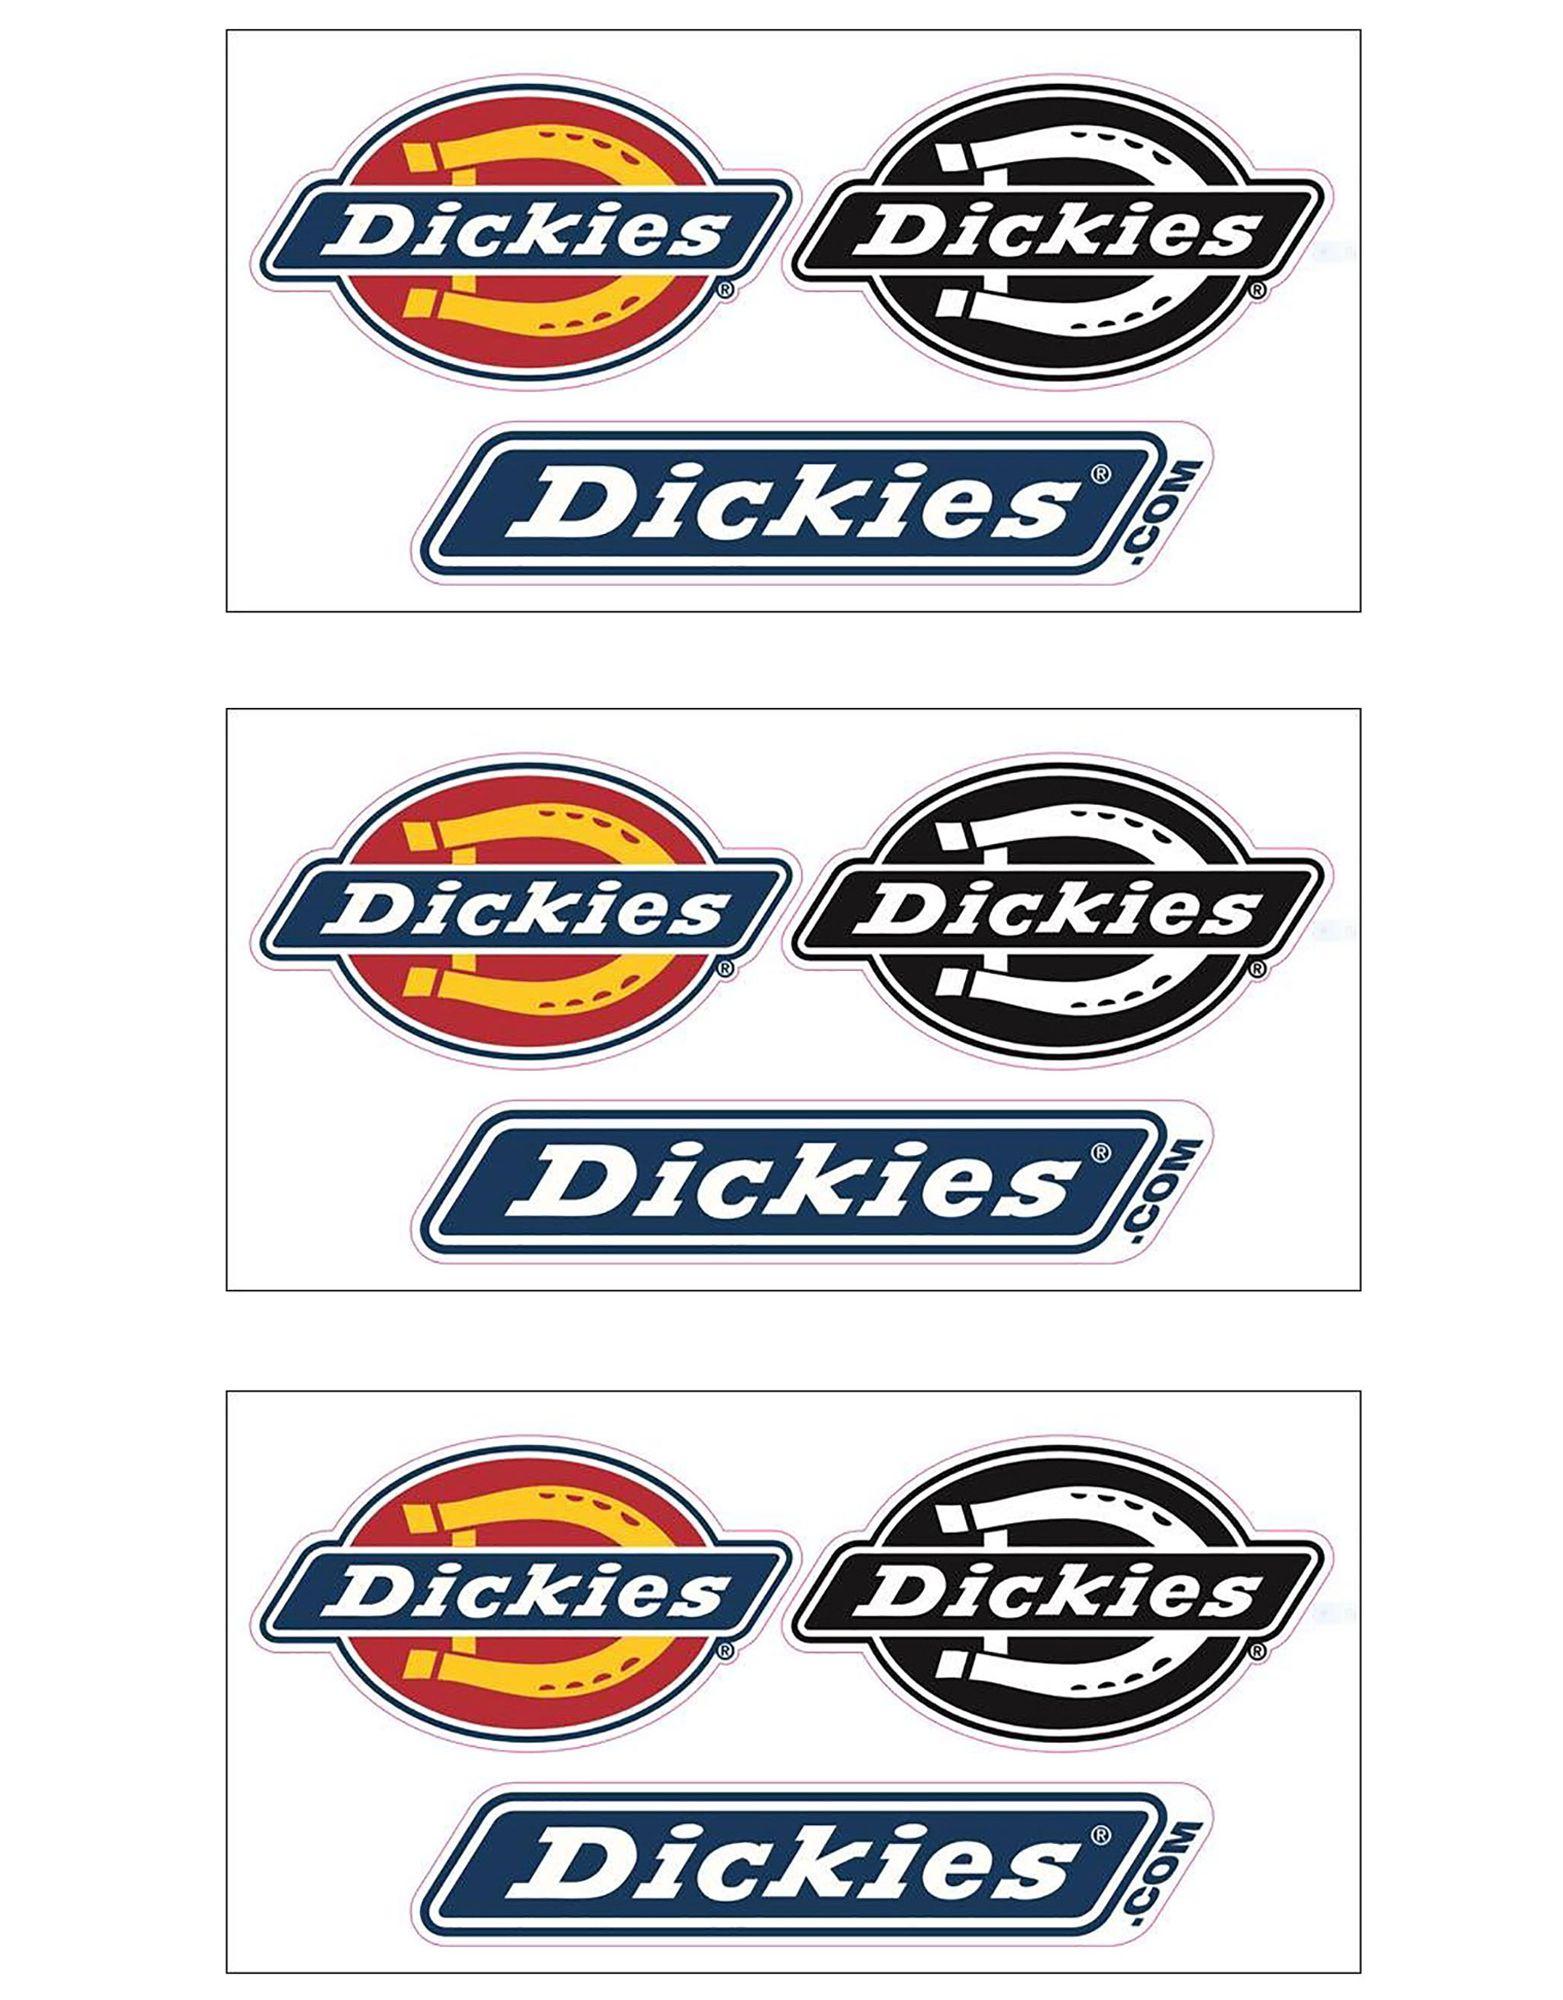 Red White and Yellow Brand Logo - Best Selling Dickies Clothes for Men, Women & Kids, Blue, Red, White